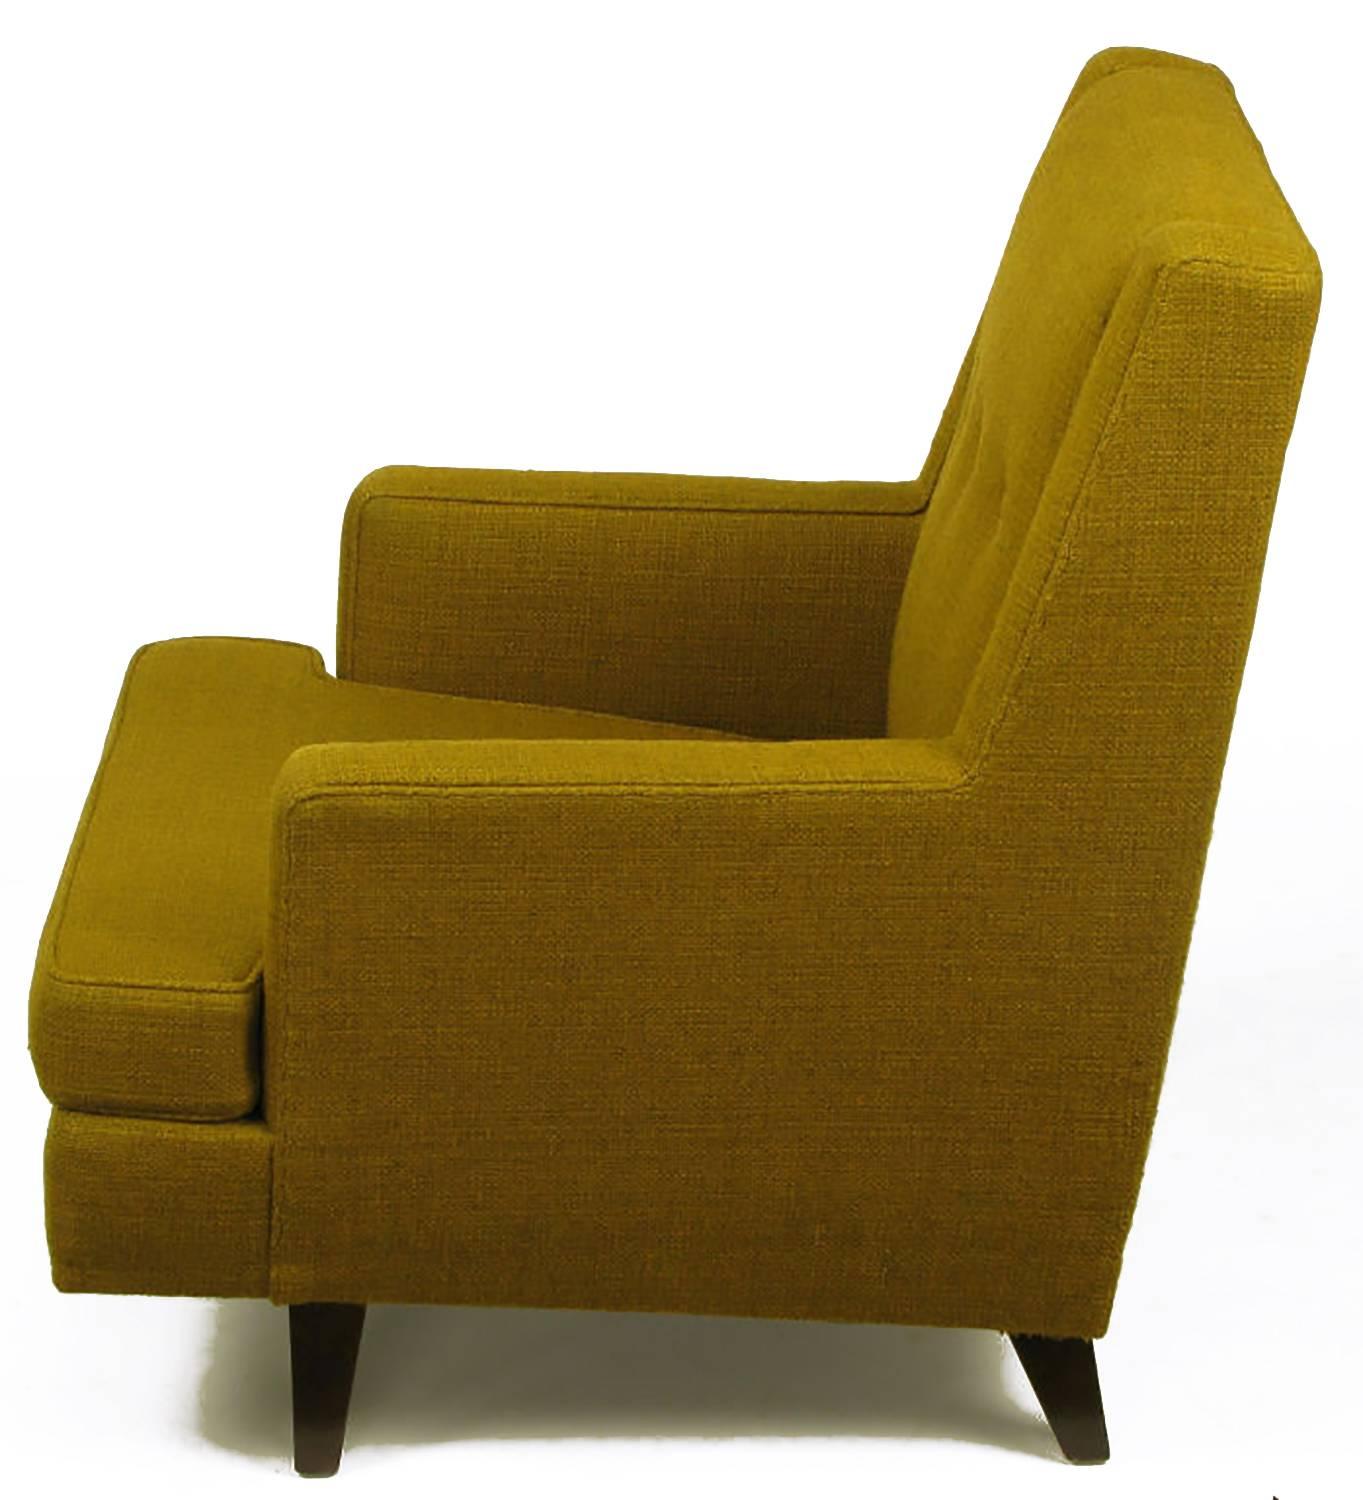 American Edward Wormley Lounge Chair in Moss Green Wool Upholstery For Sale